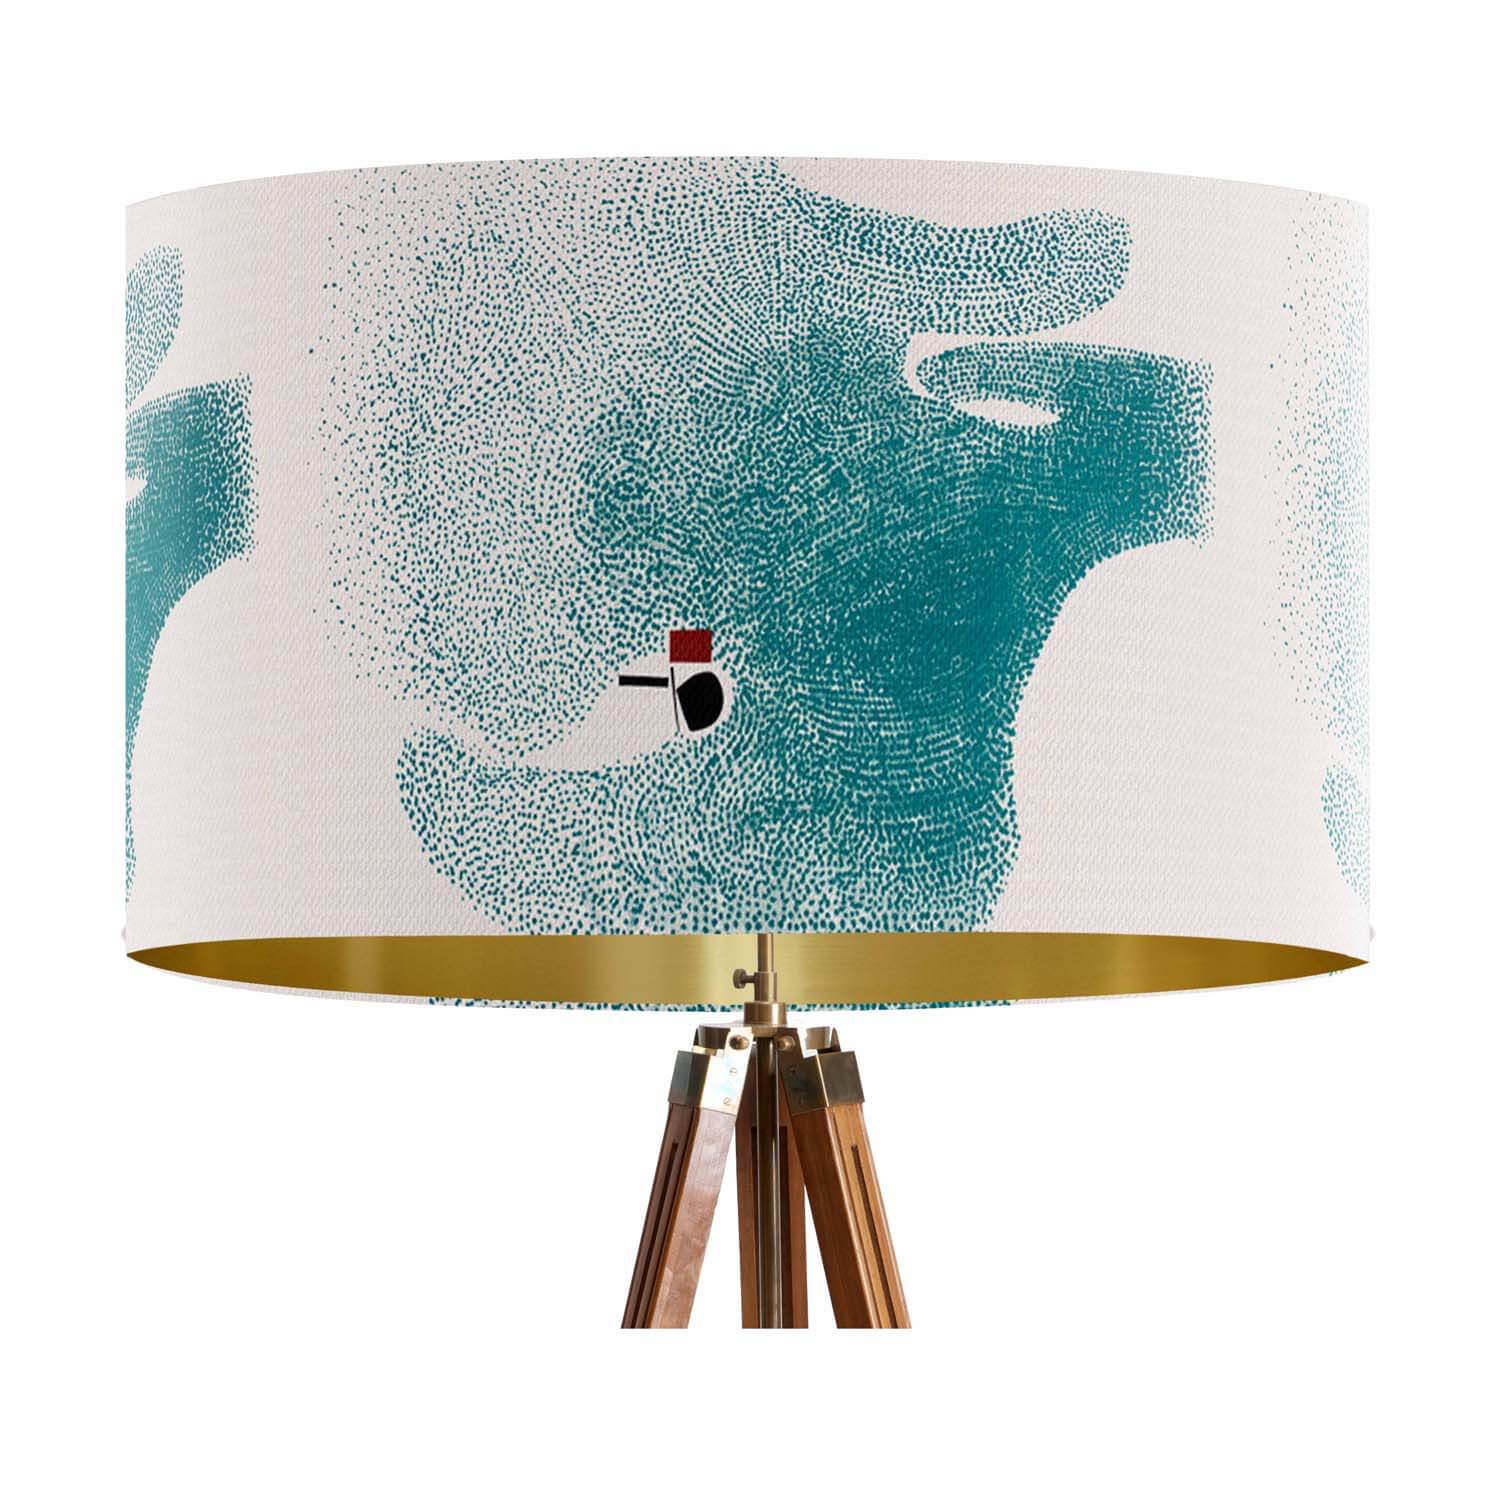 Points of Contact No. 2 - TATE - Victor Pasmore Lampshade